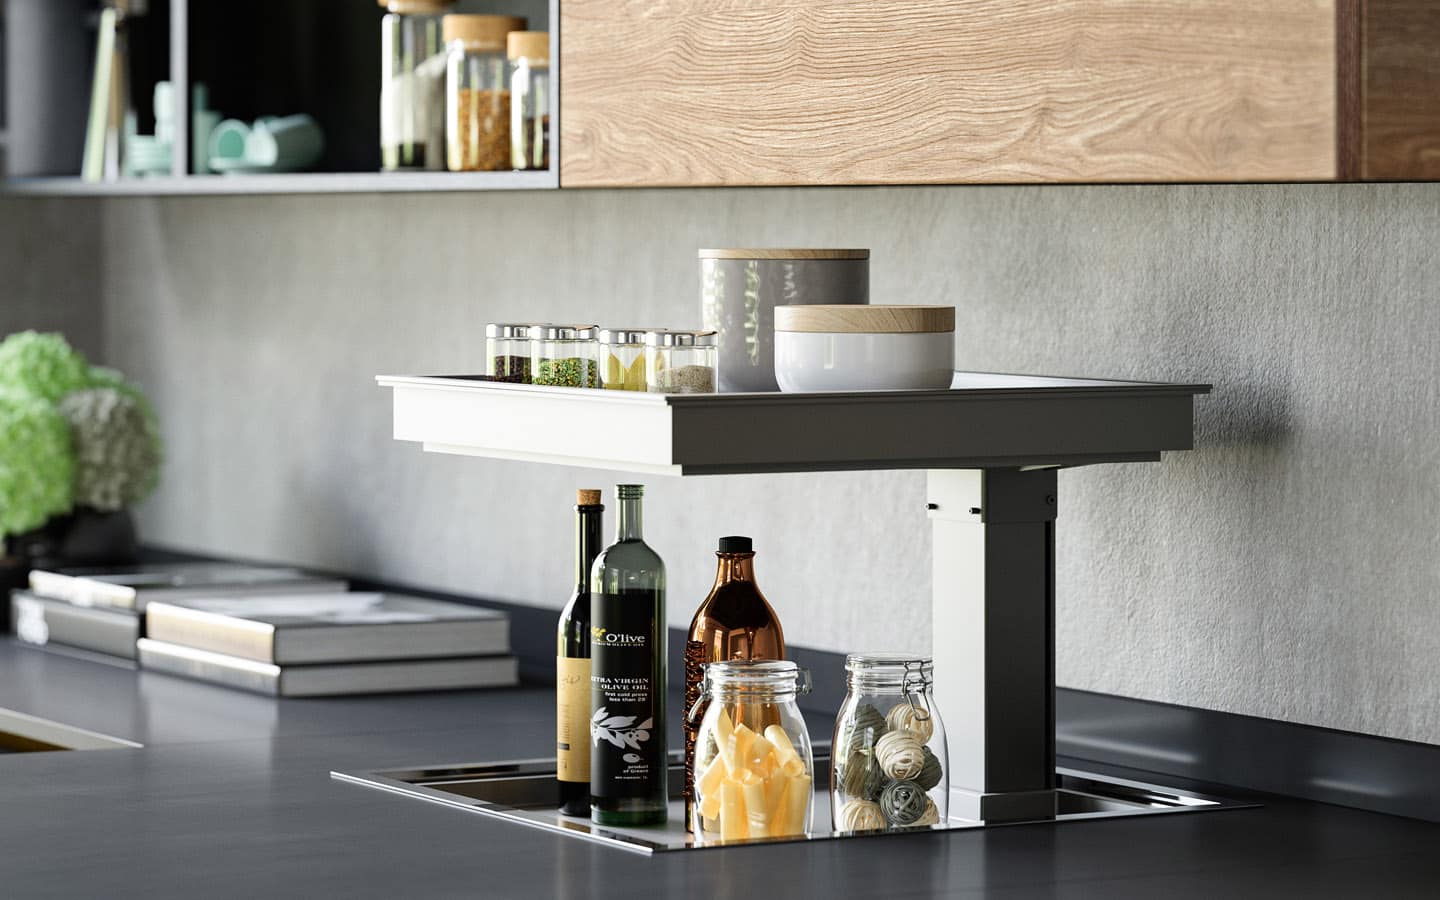 Ideal for corner base cabinets, Qanto consists of two space-saving electrically liftable shelves. The system blocks the mechanism when it detects the presence of a hand, ensuring safety of use.